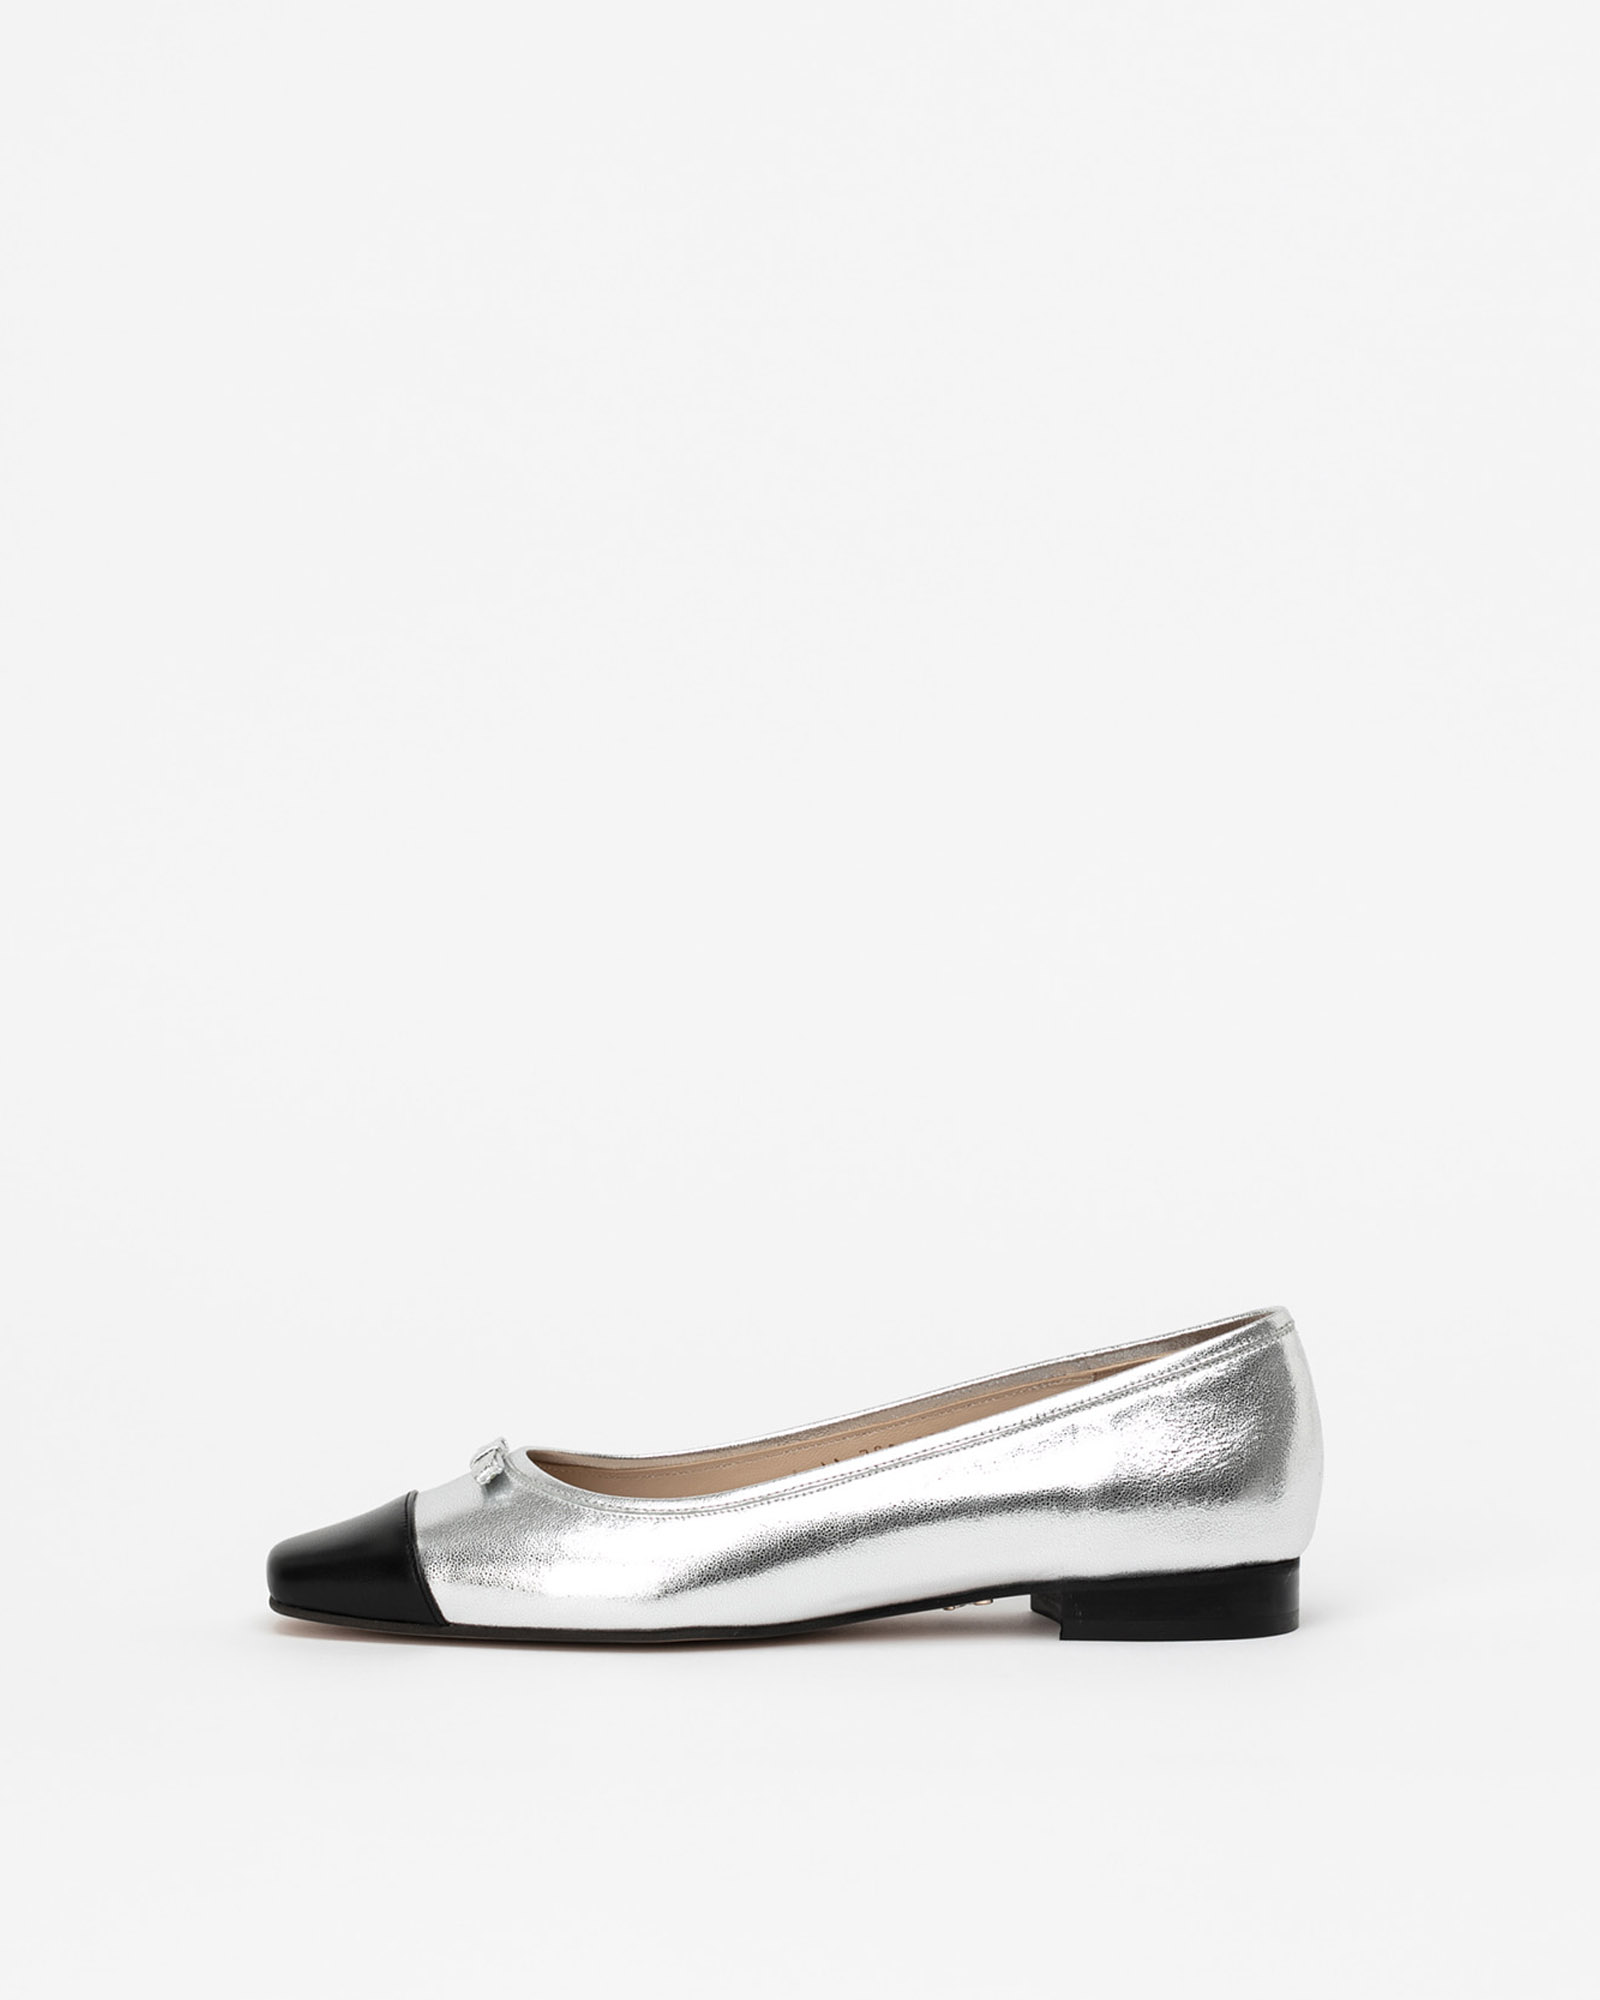 Revon Flat Shoes in Champagne Silver with Black Toe